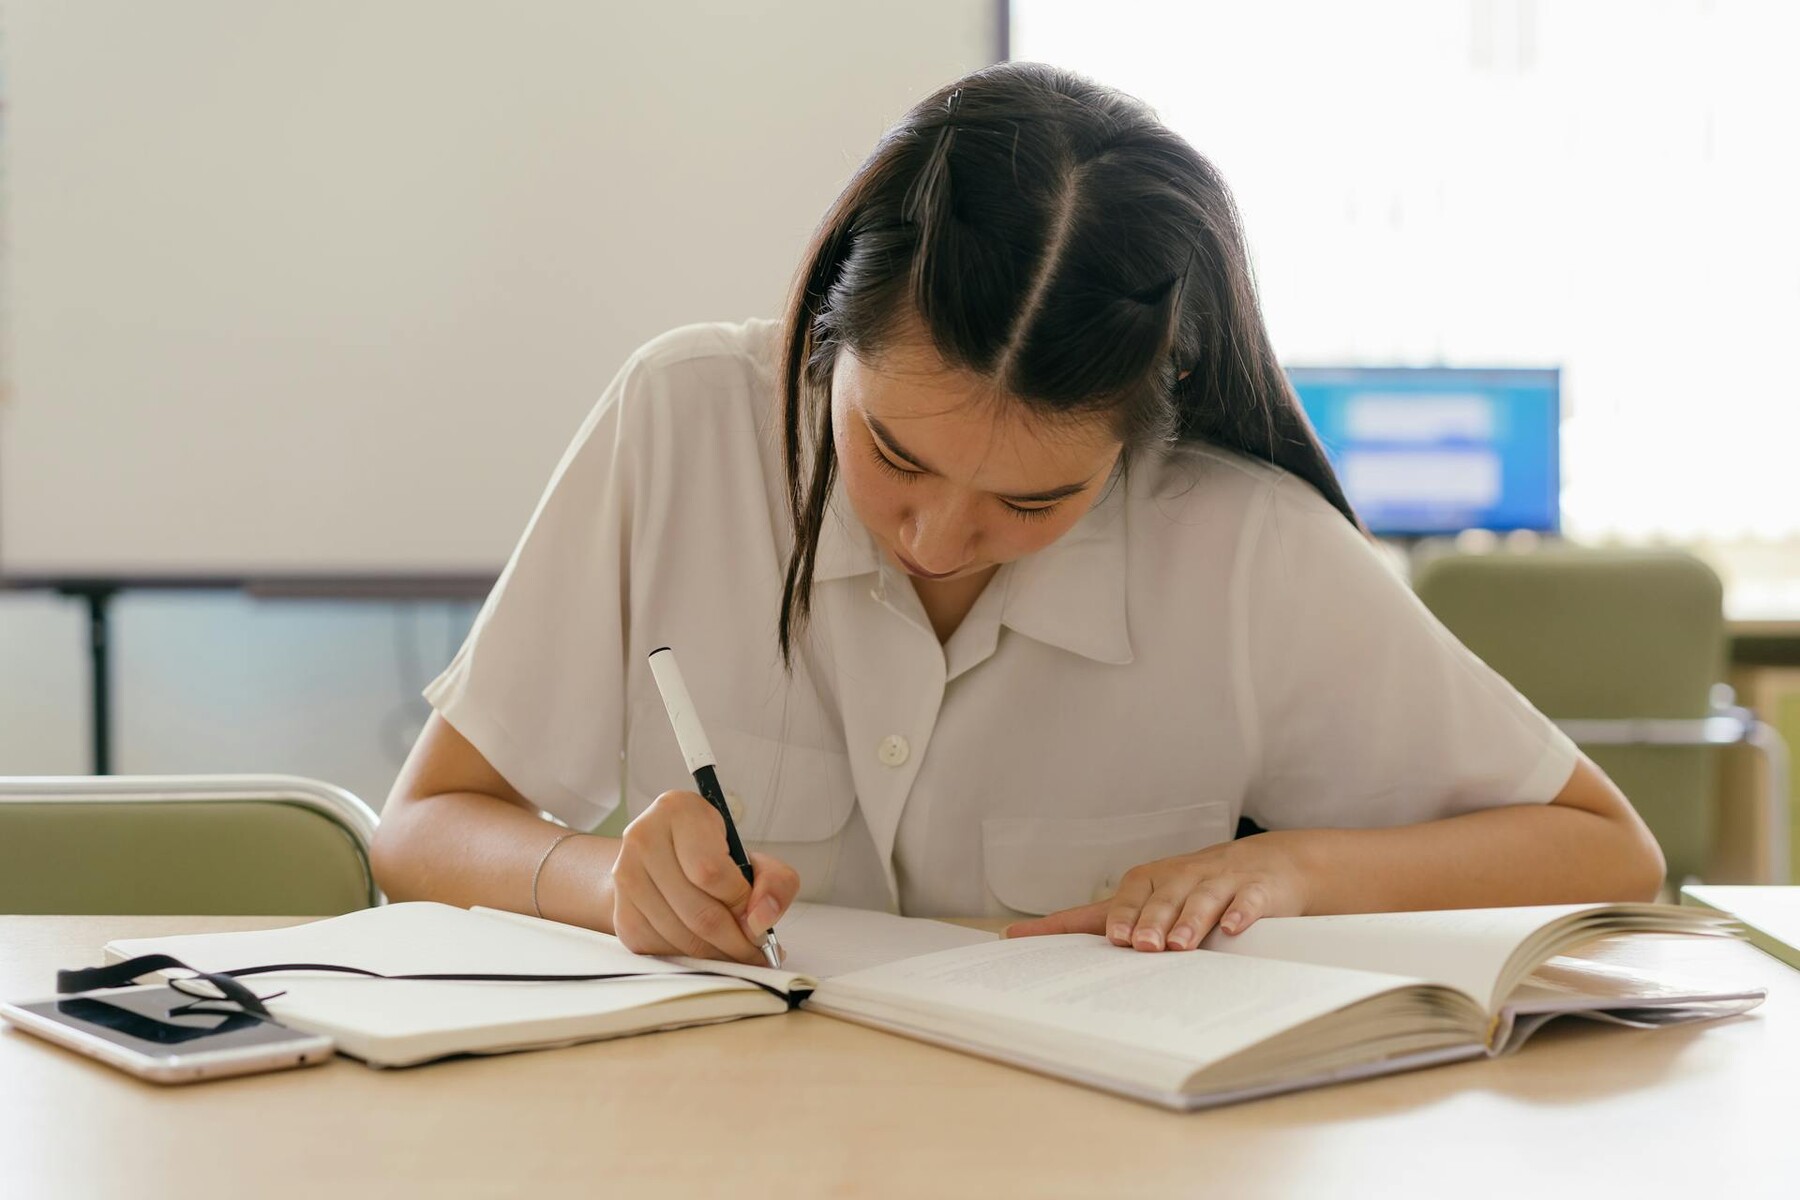 A girl focused on writing in a notebook at a desk